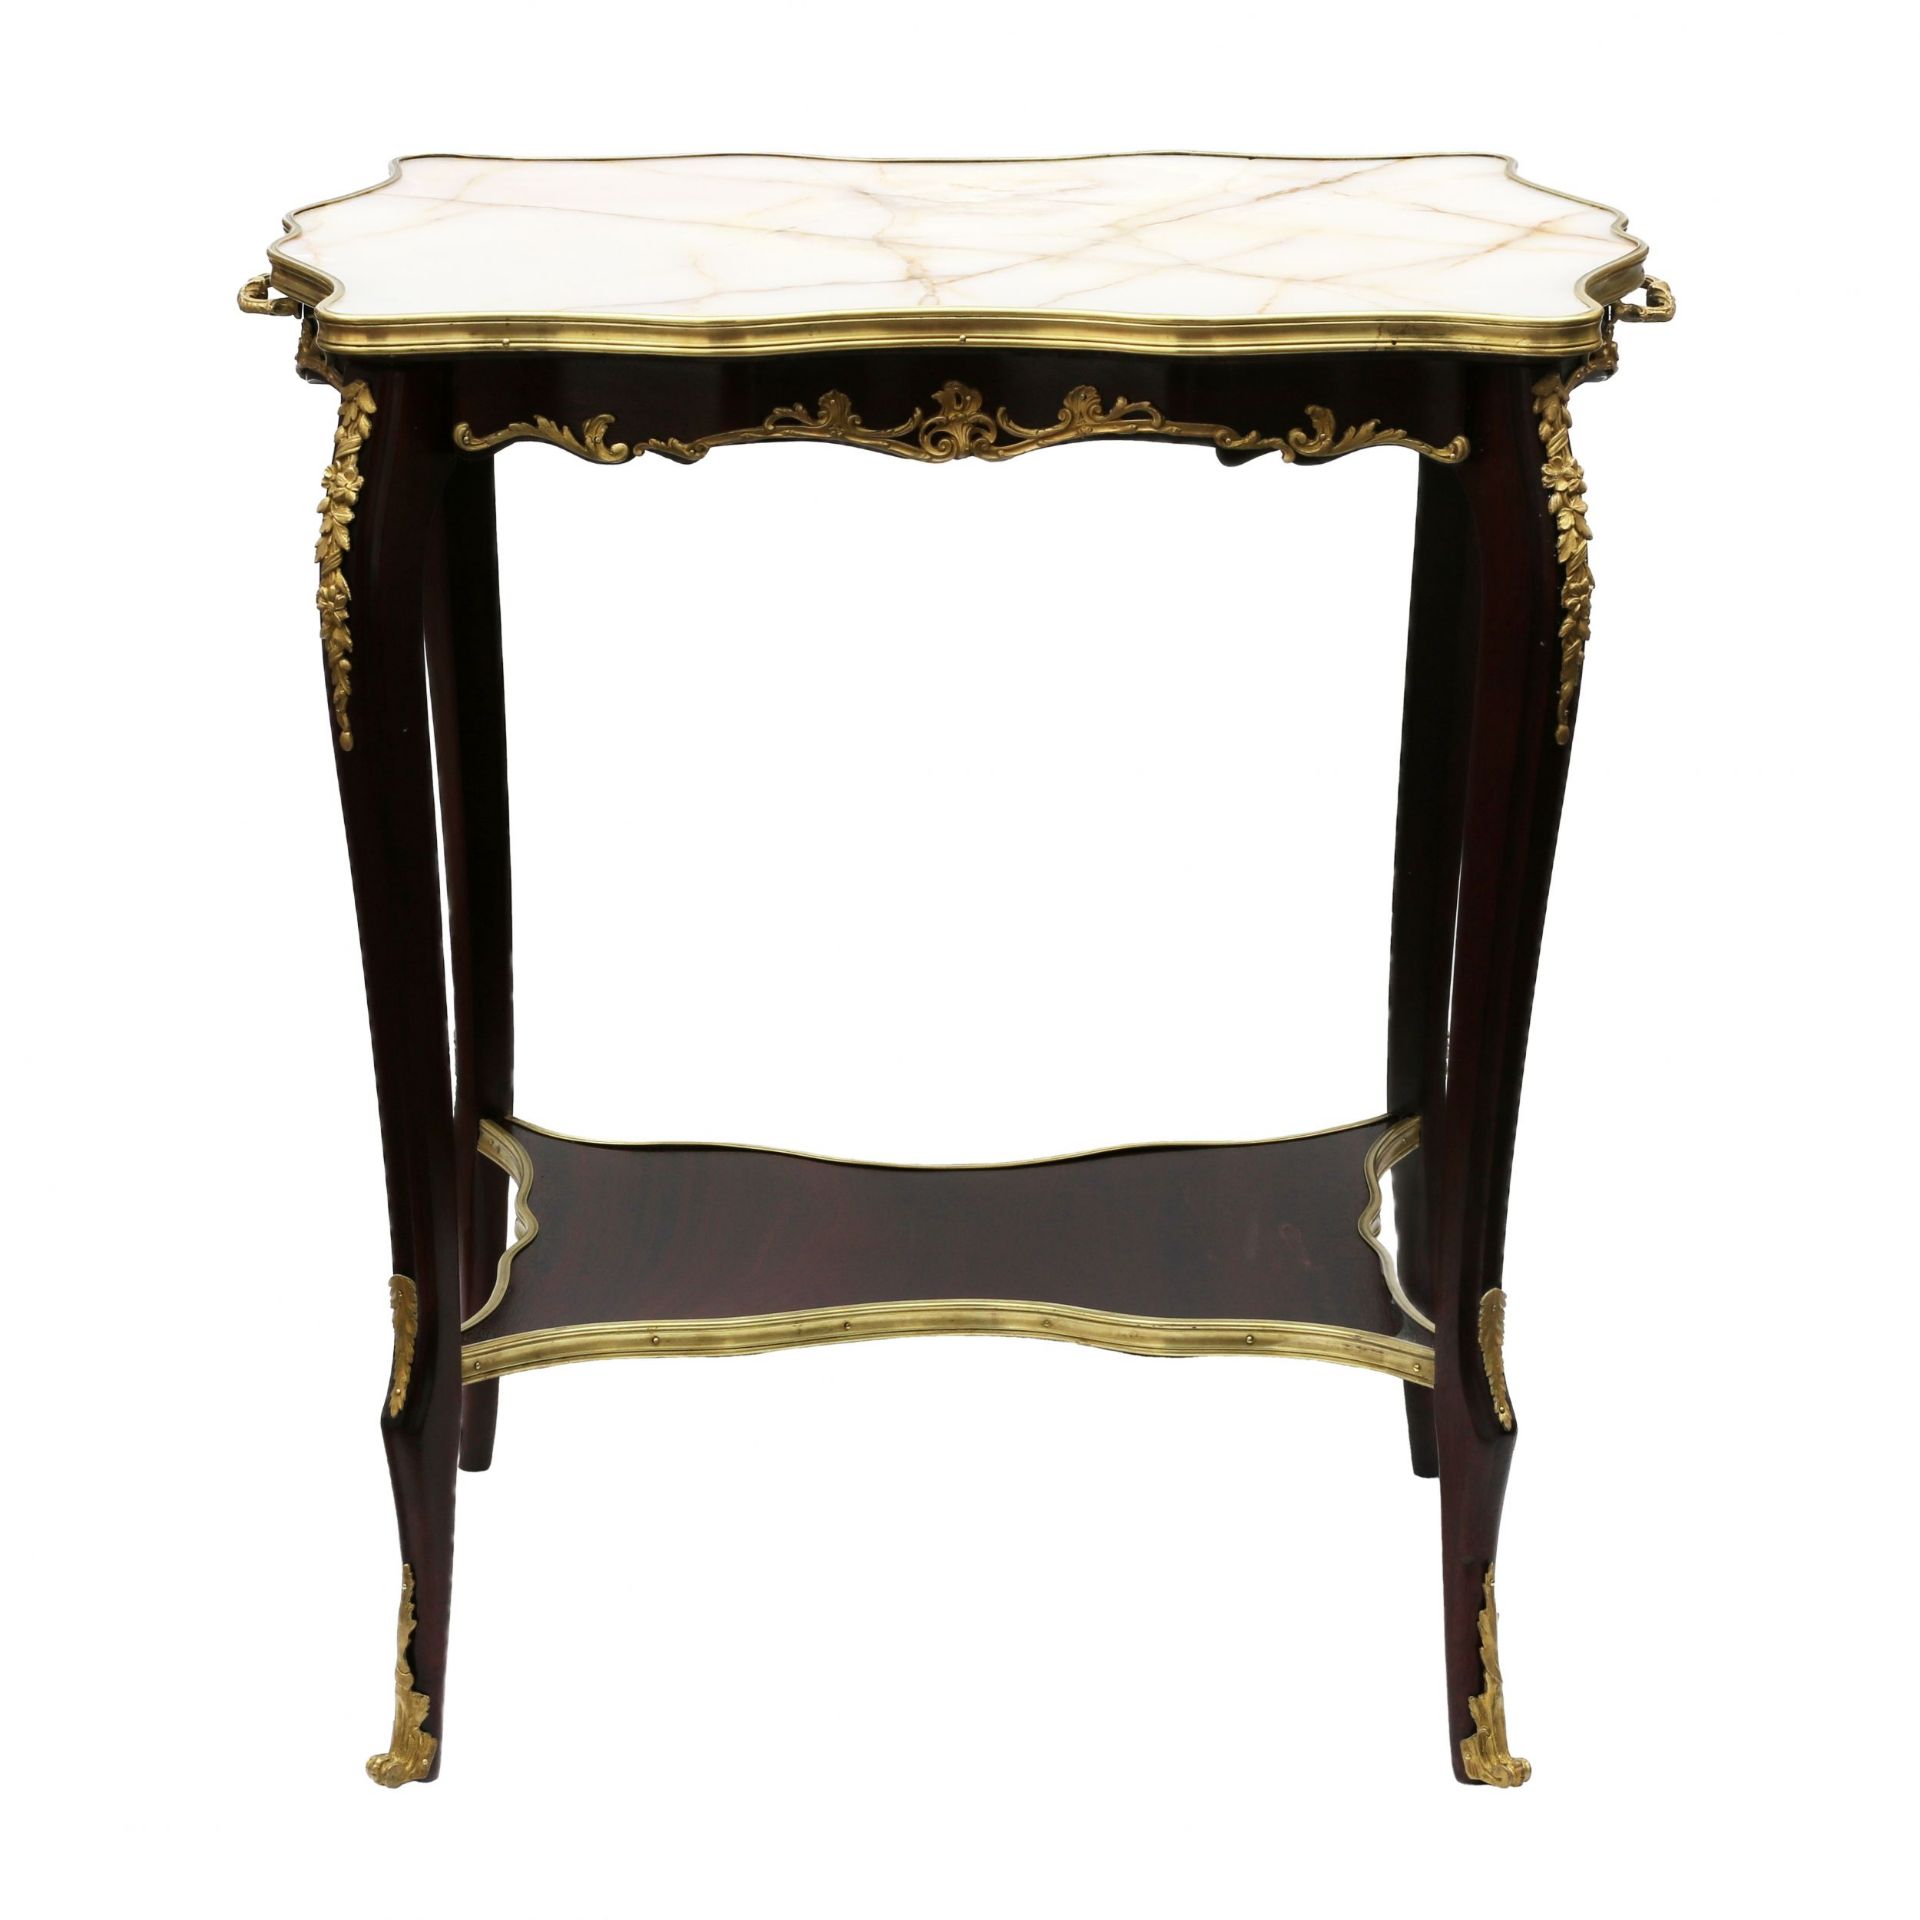 Serving table mahogany, gilded bronze with a marble top of the turn of the 19th and 20th centuries. - Image 2 of 5